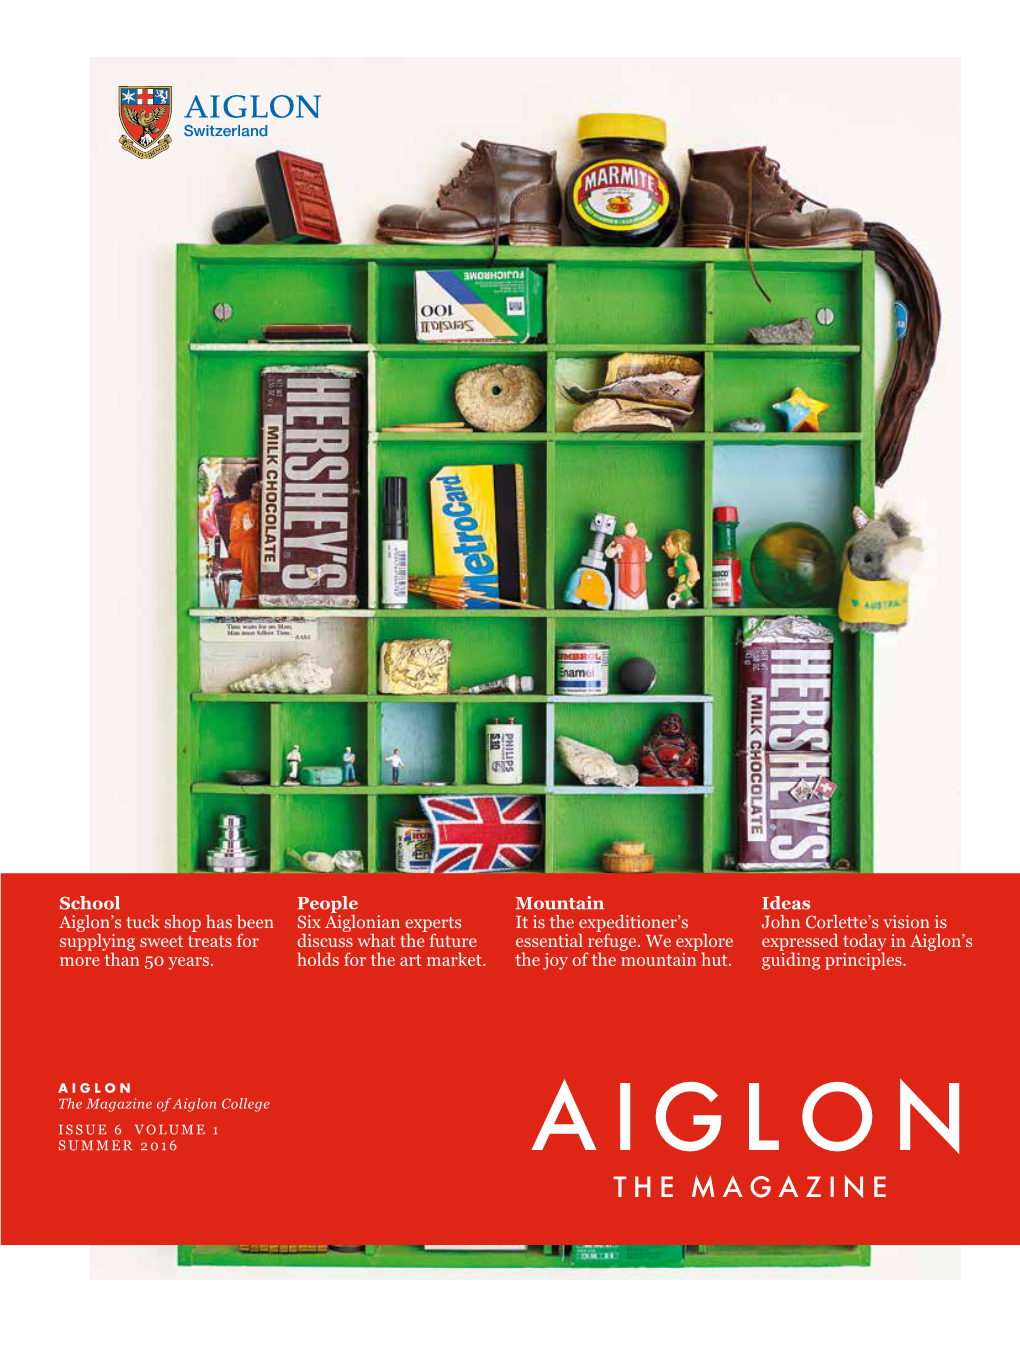 Aiglon Magazine for Its Join the Interesting Content and Good Conversation! Board of Governors Design and Layout